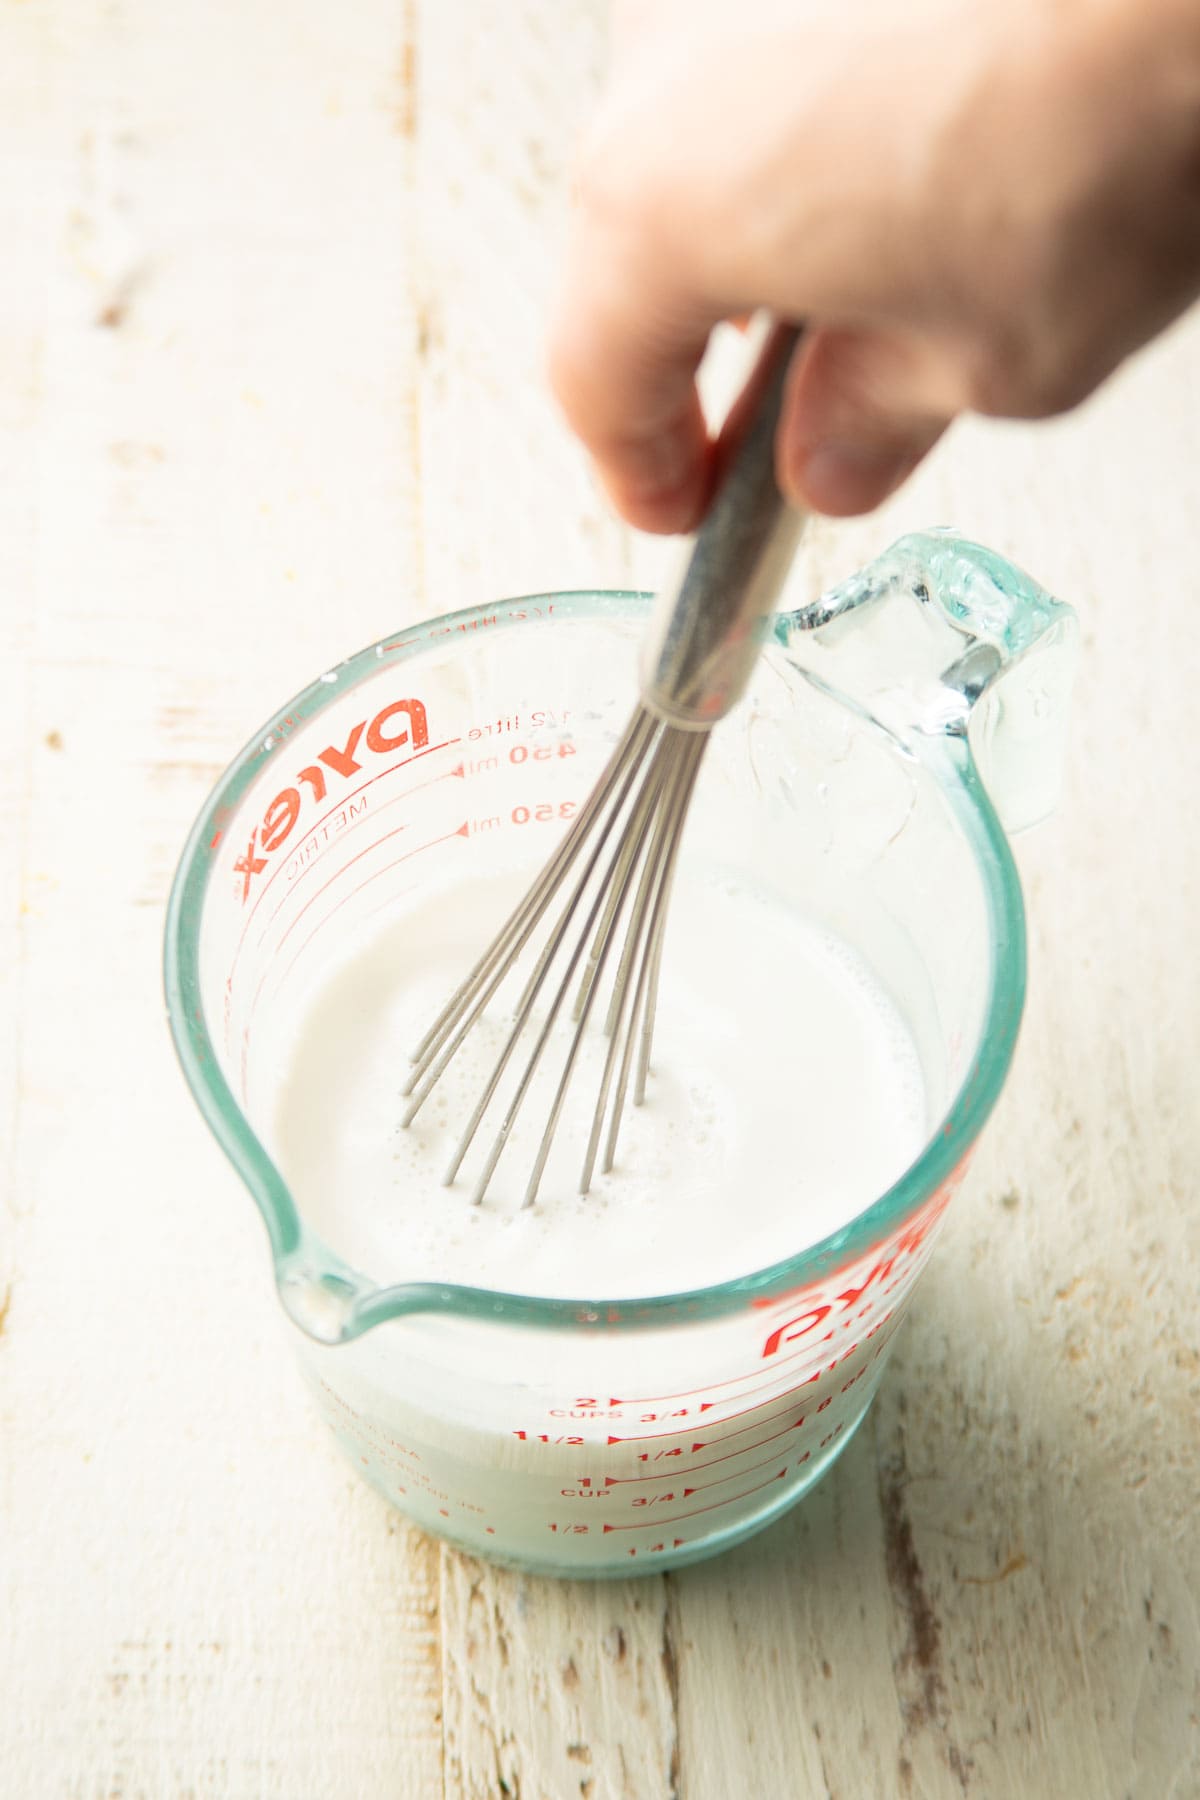 Hand whisking cornstarch and non-dairy milk together in a measuring cup.